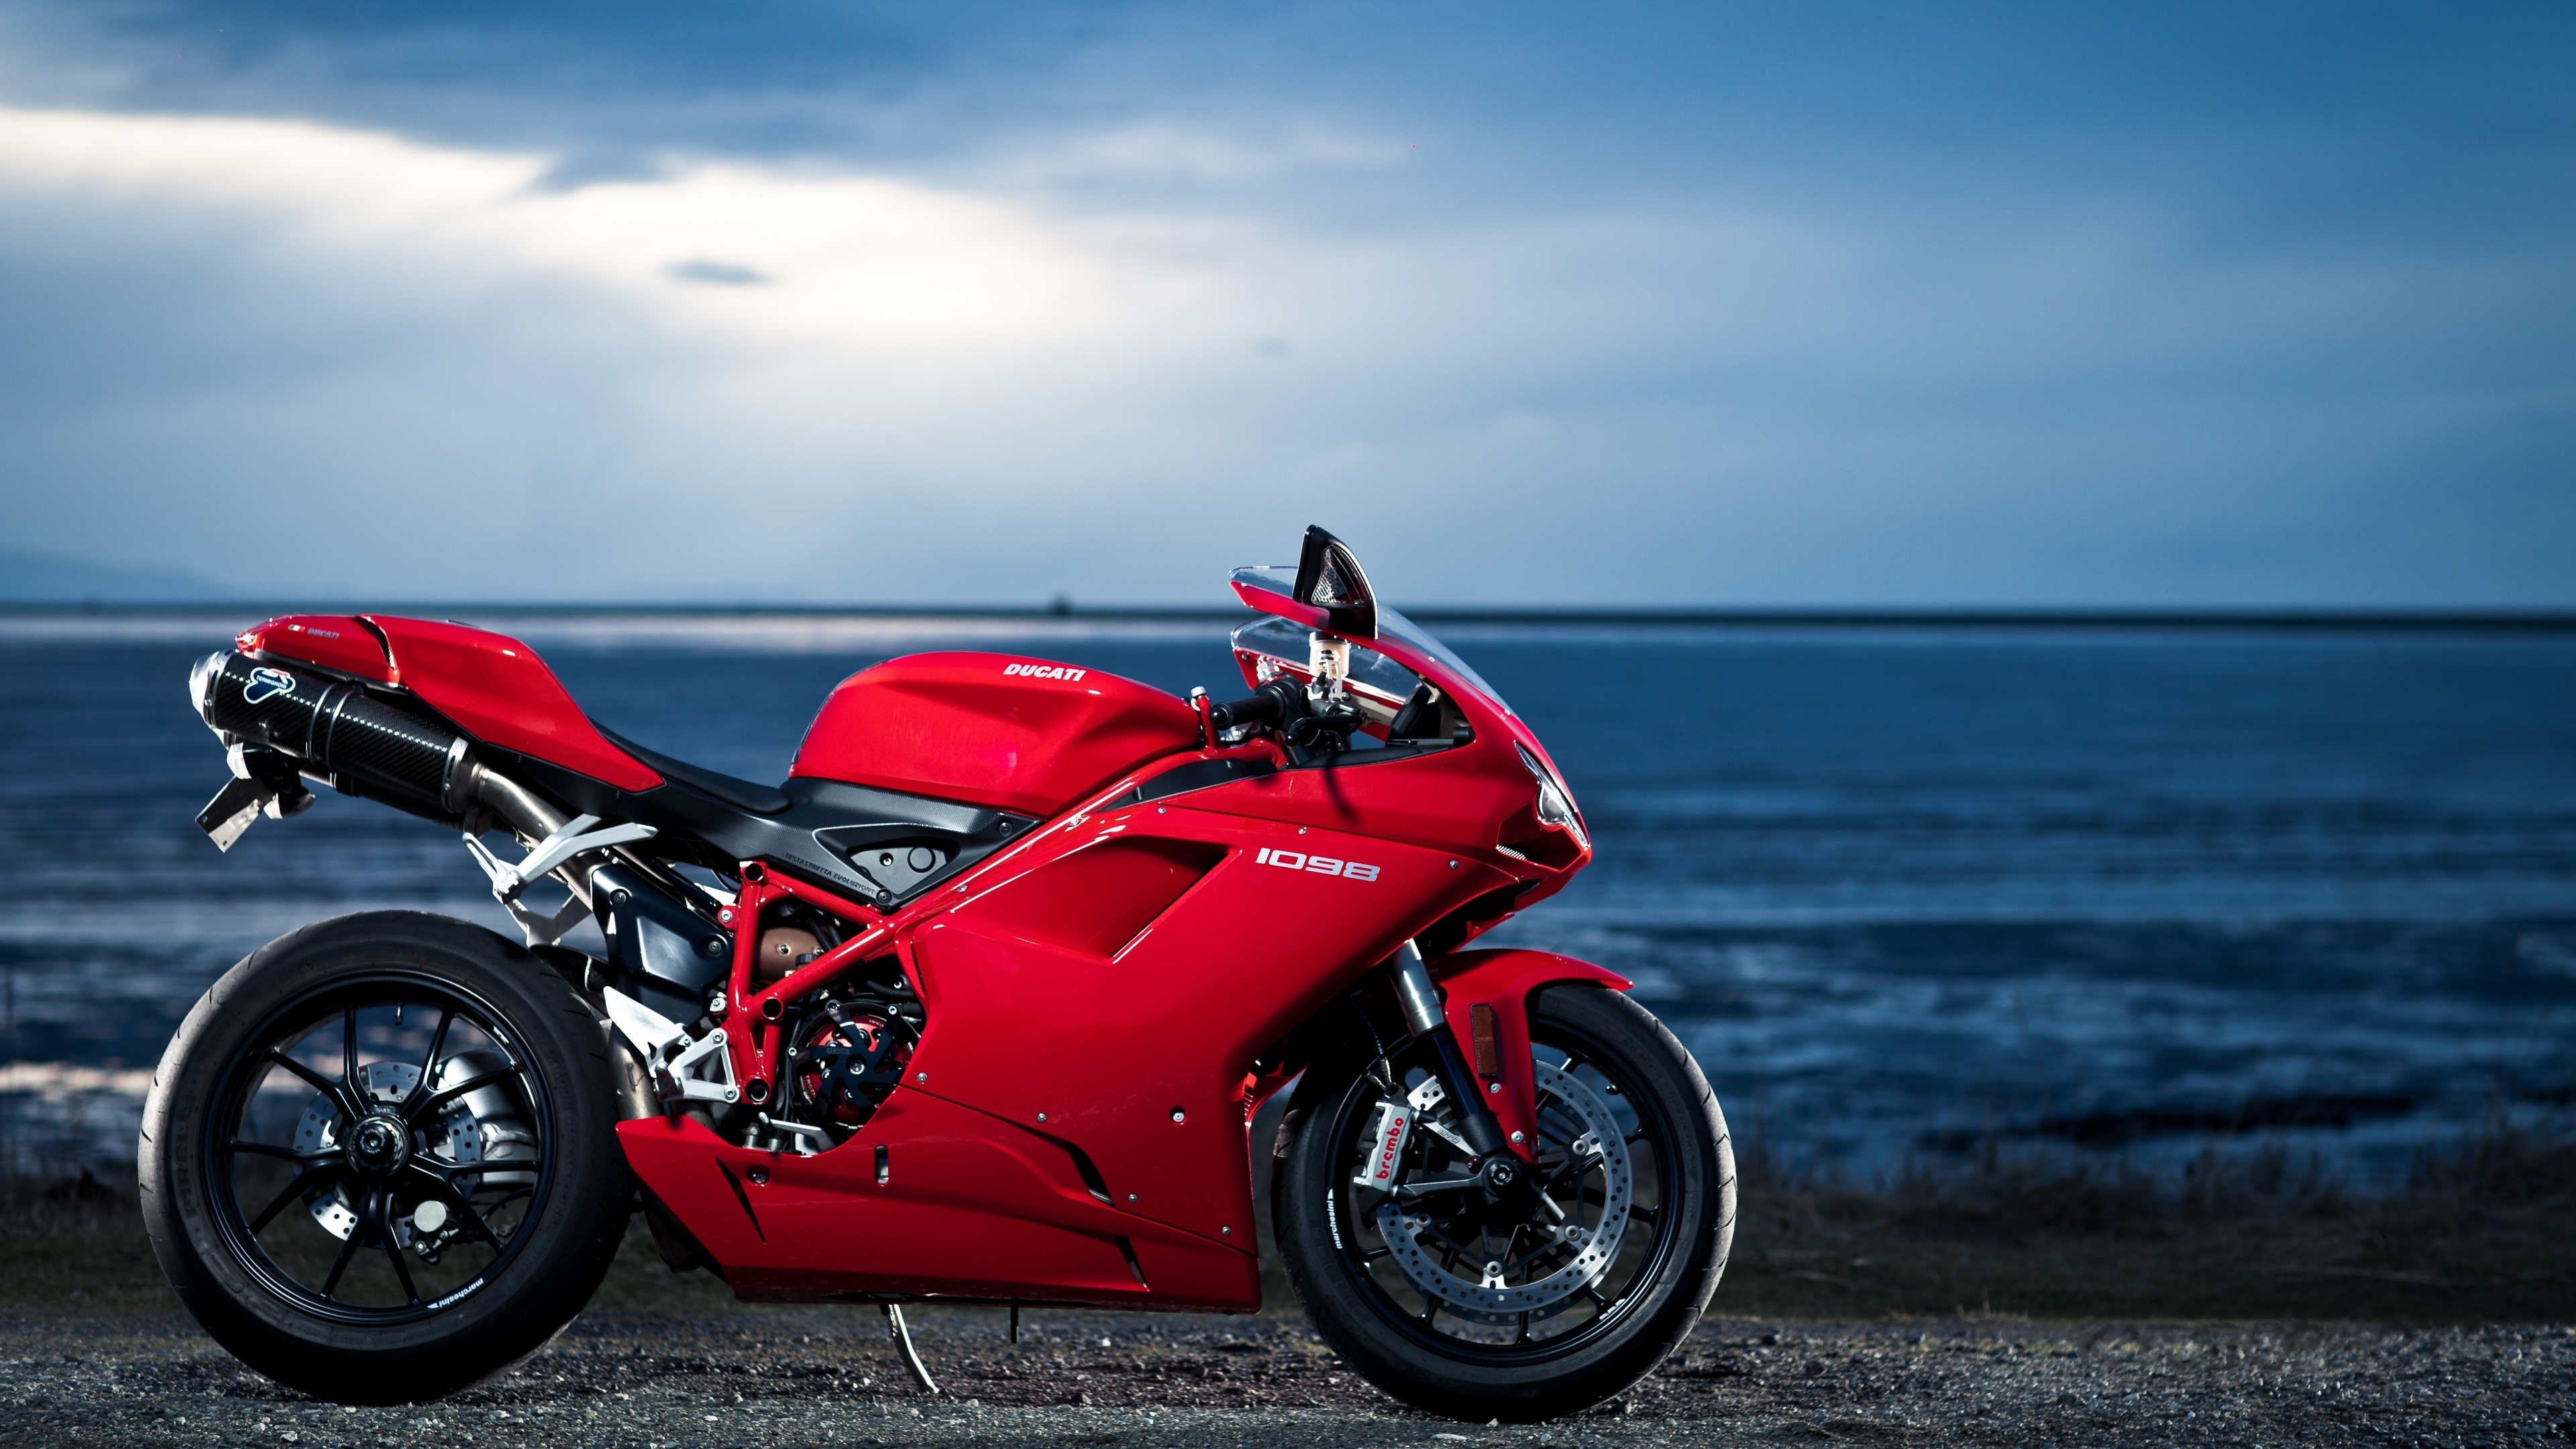 Red and Black Sports Bike on Seashore During Daytime. Wallpaper in 3840x2160 Resolution